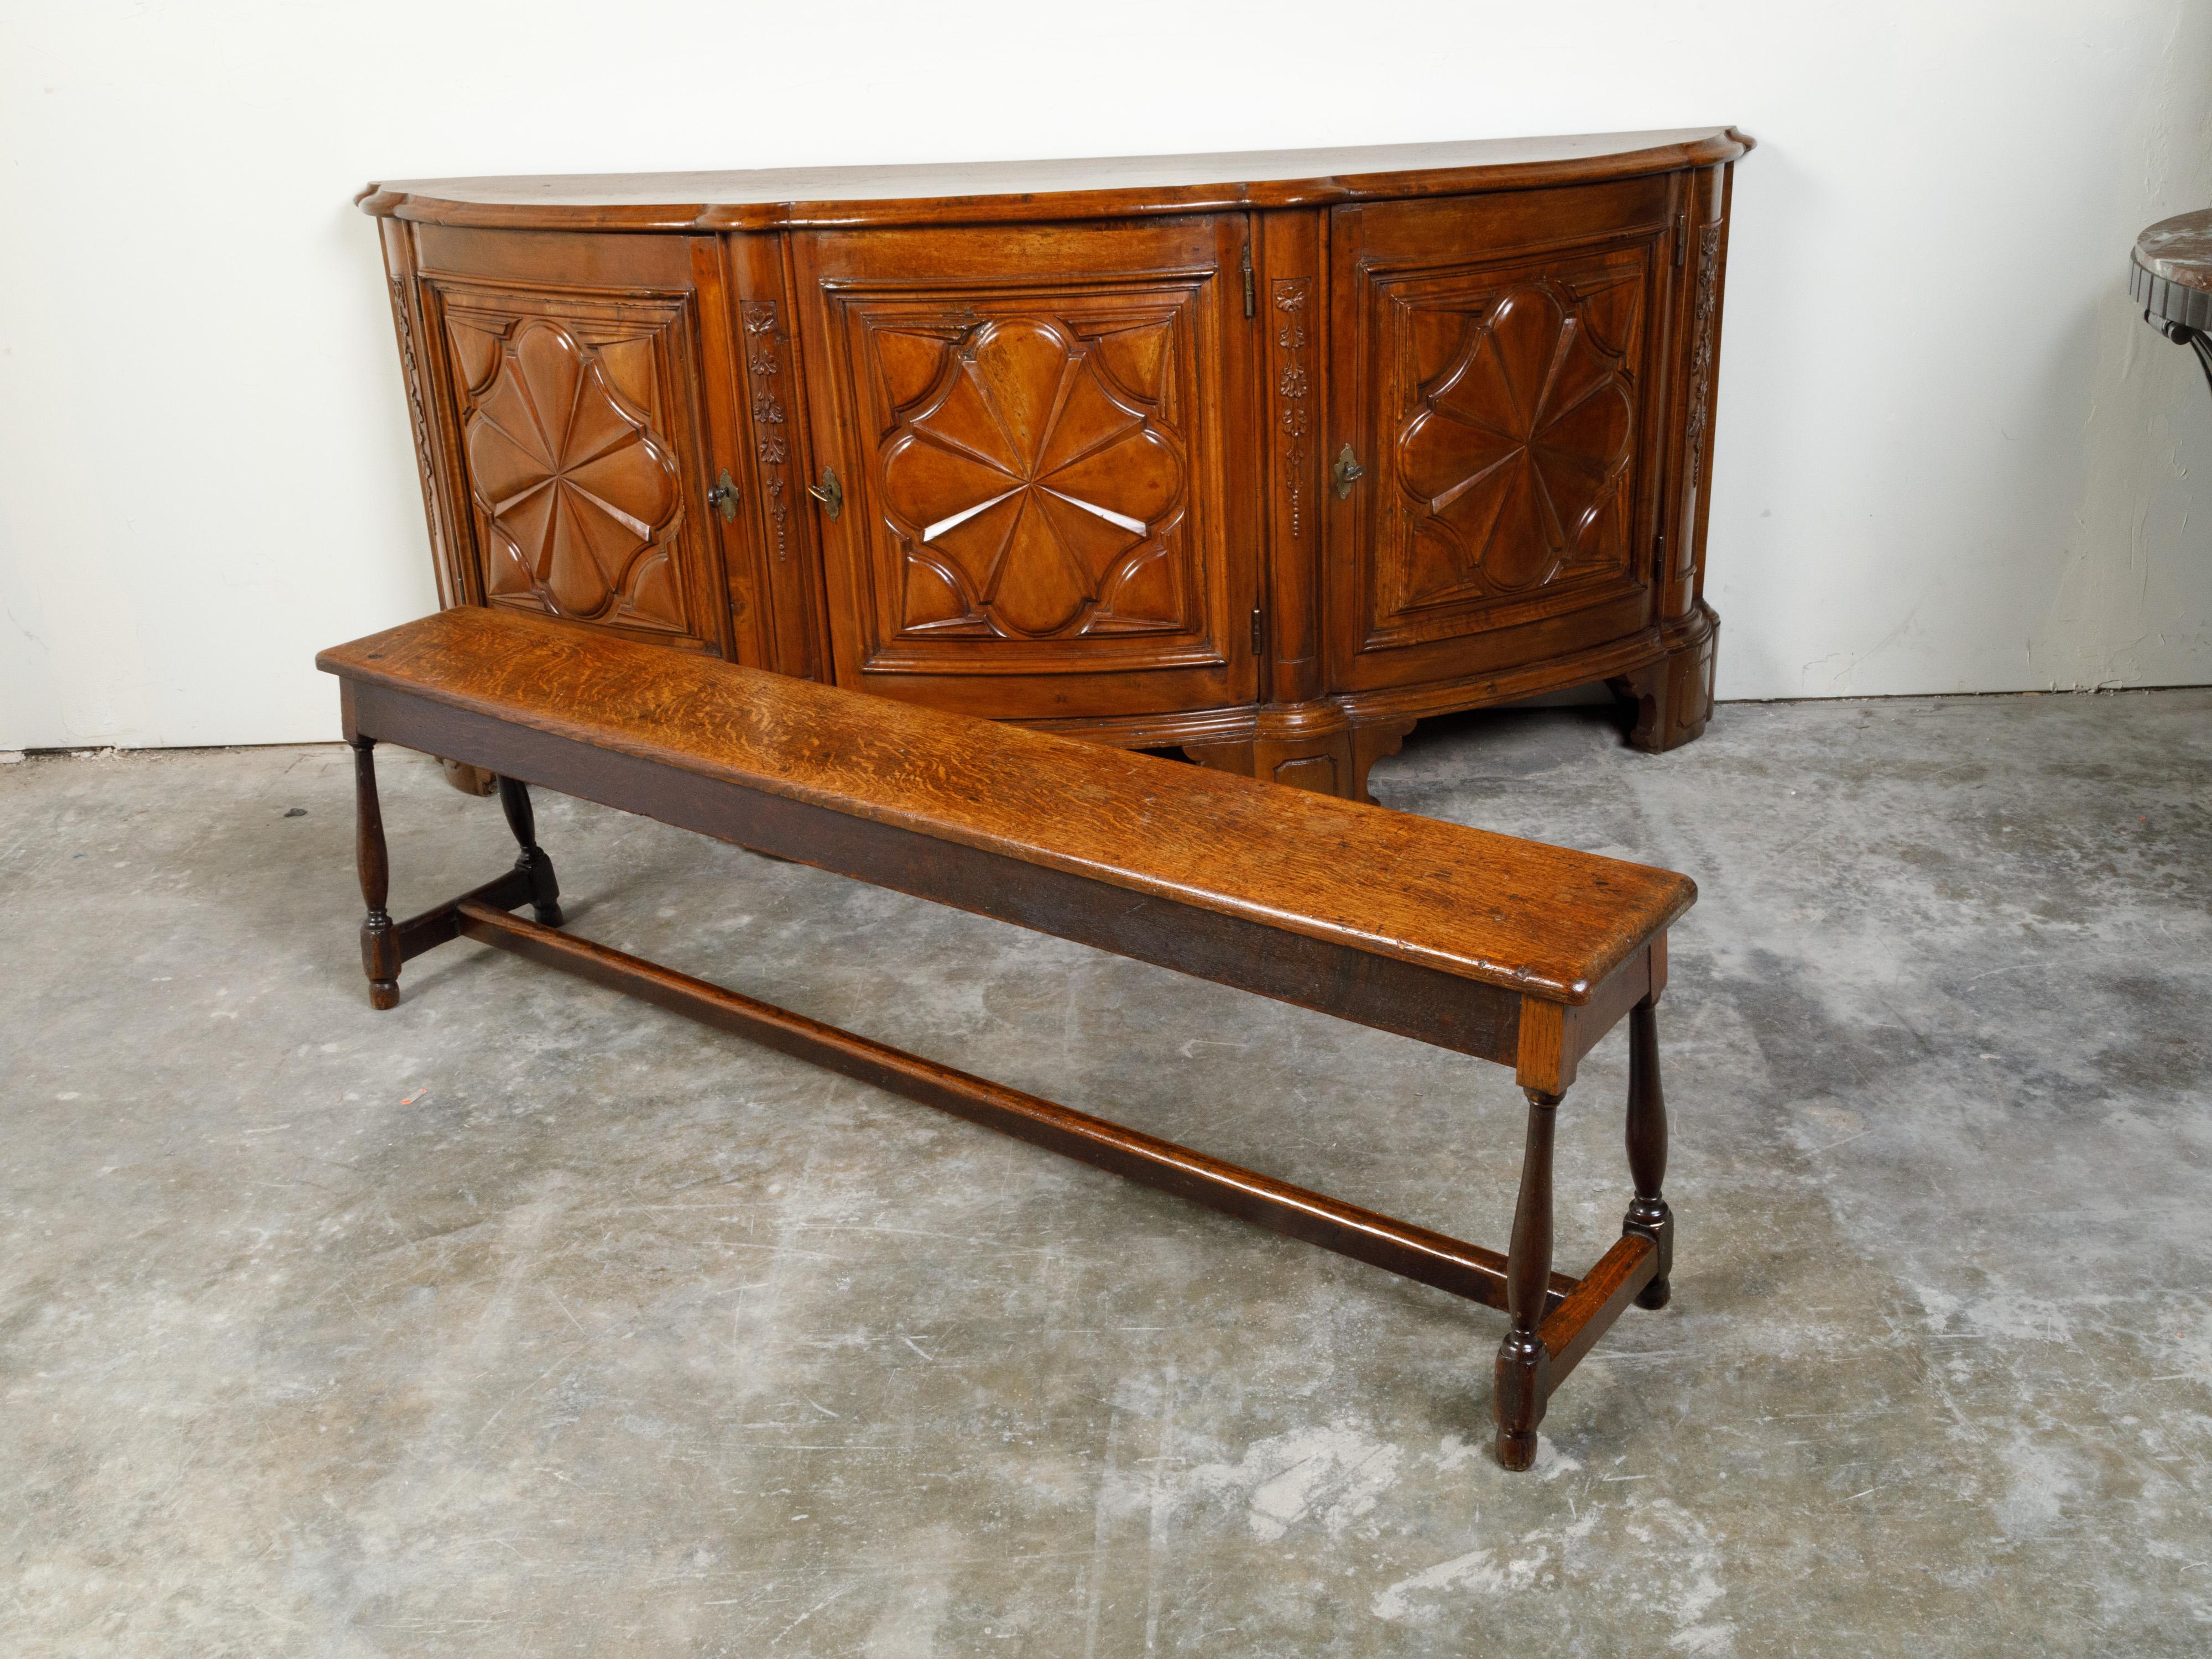 20th Century English 1900s Turn of the Century Oak Bench with Splaying Column-Shaped Legs